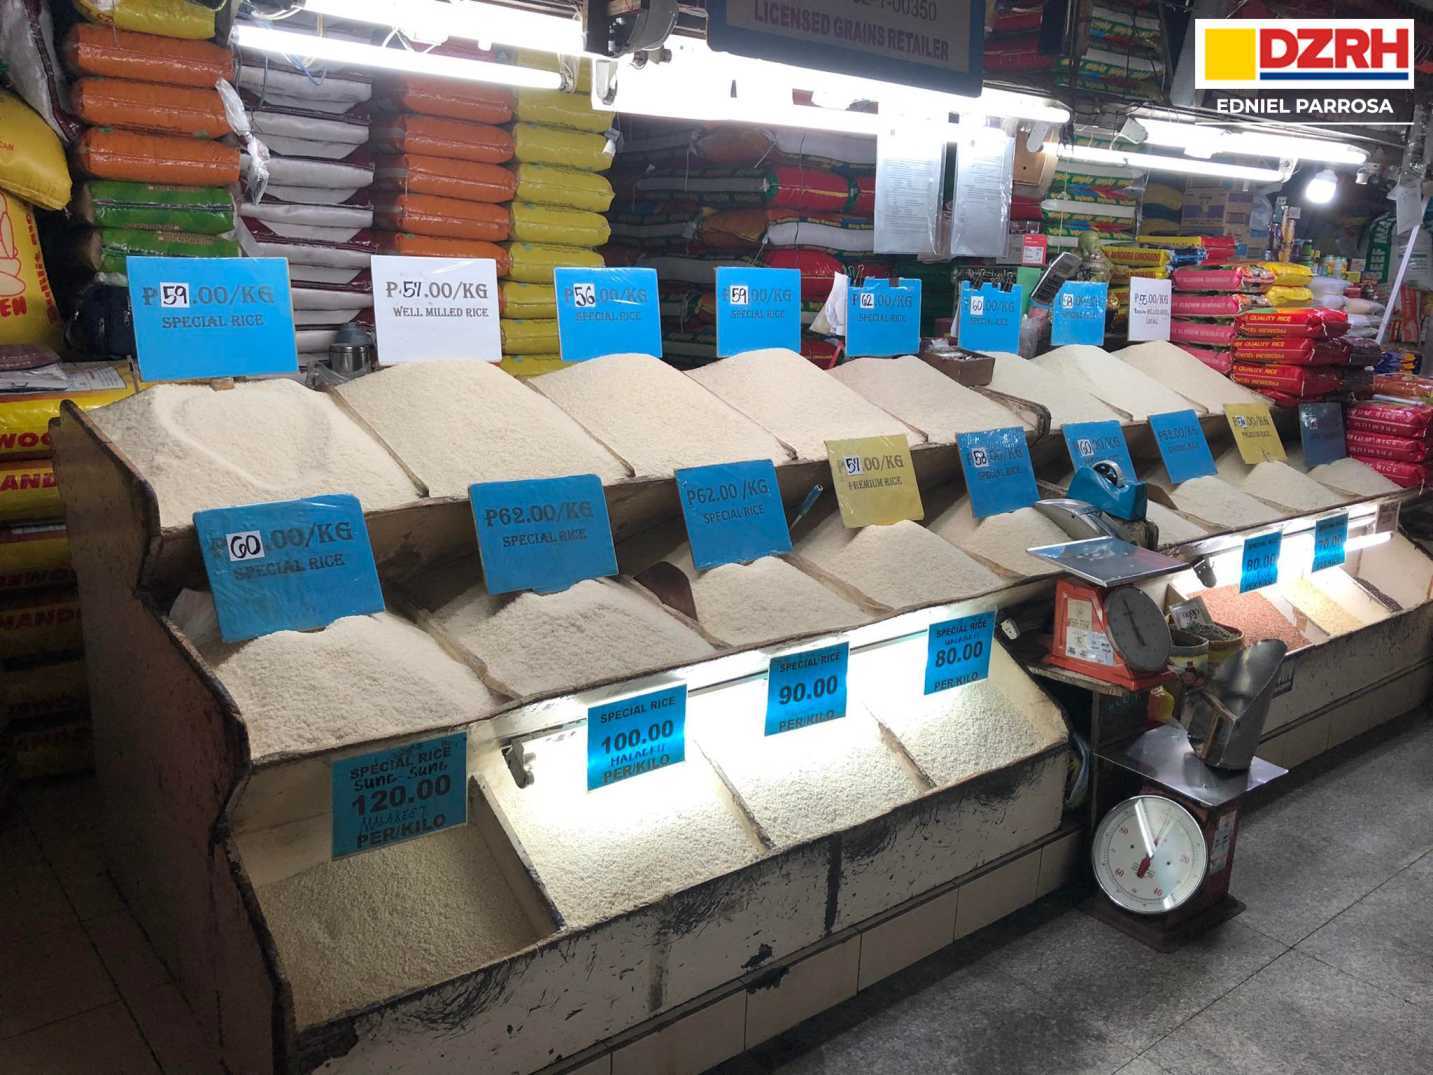 PBBM imposes price ceiling on rice nationwide